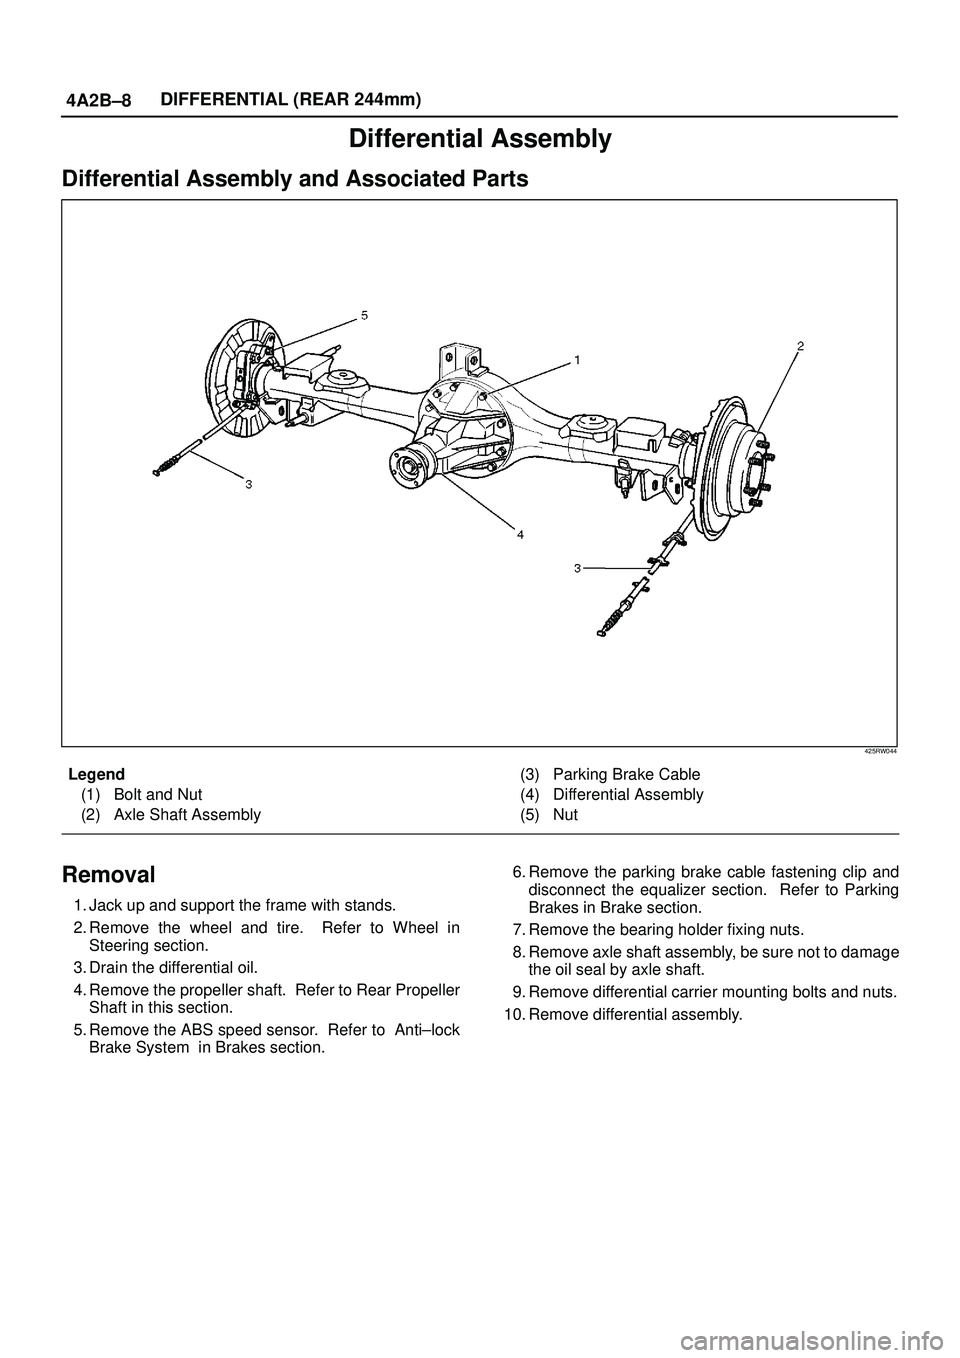 ISUZU TROOPER 1998  Service Repair Manual 4A2B±8DIFFERENTIAL (REAR 244mm)
Differential Assembly
Differential Assembly and Associated Parts
425RW044
Legend
(1) Bolt and Nut
(2) Axle Shaft Assembly(3) Parking Brake Cable
(4) Differential Assem